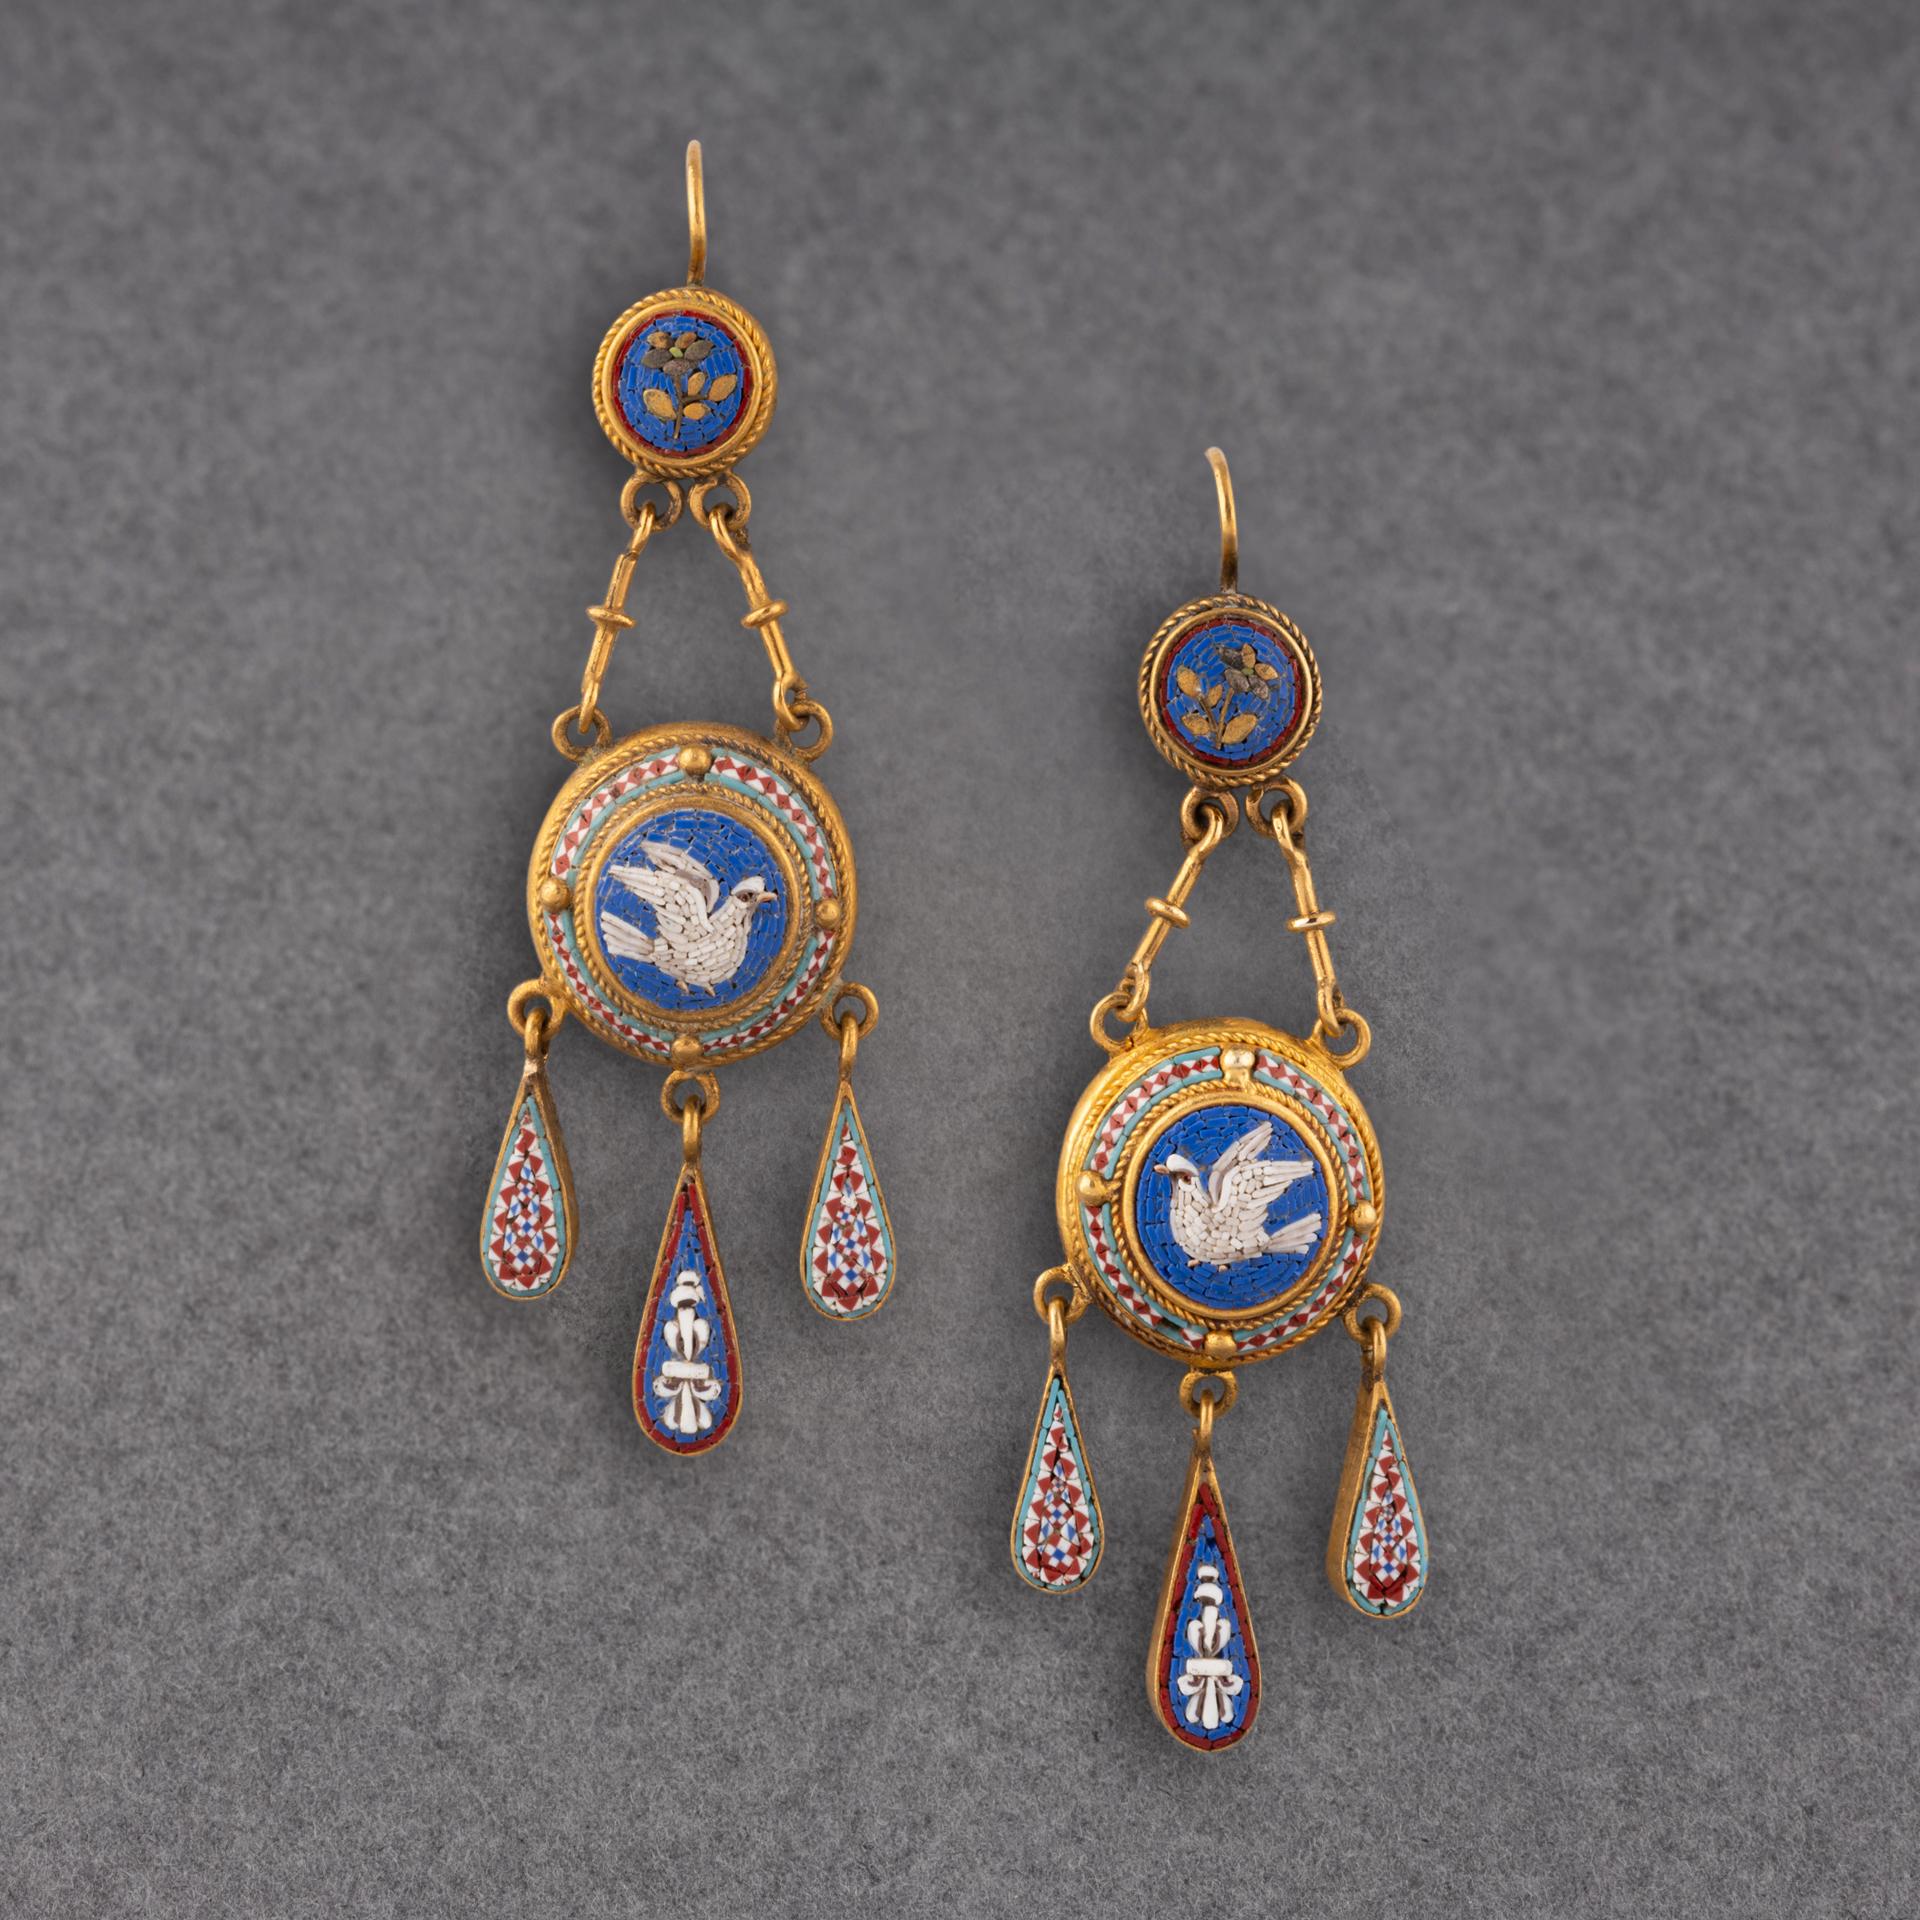 A very beautiful pair of antique earrings, italian made circa 1850.
Made in 18k gold and set with micro mosaïques.
Hallmarked.
Dimensions: 58mm height 22mm width
Weight: 9.50 grams